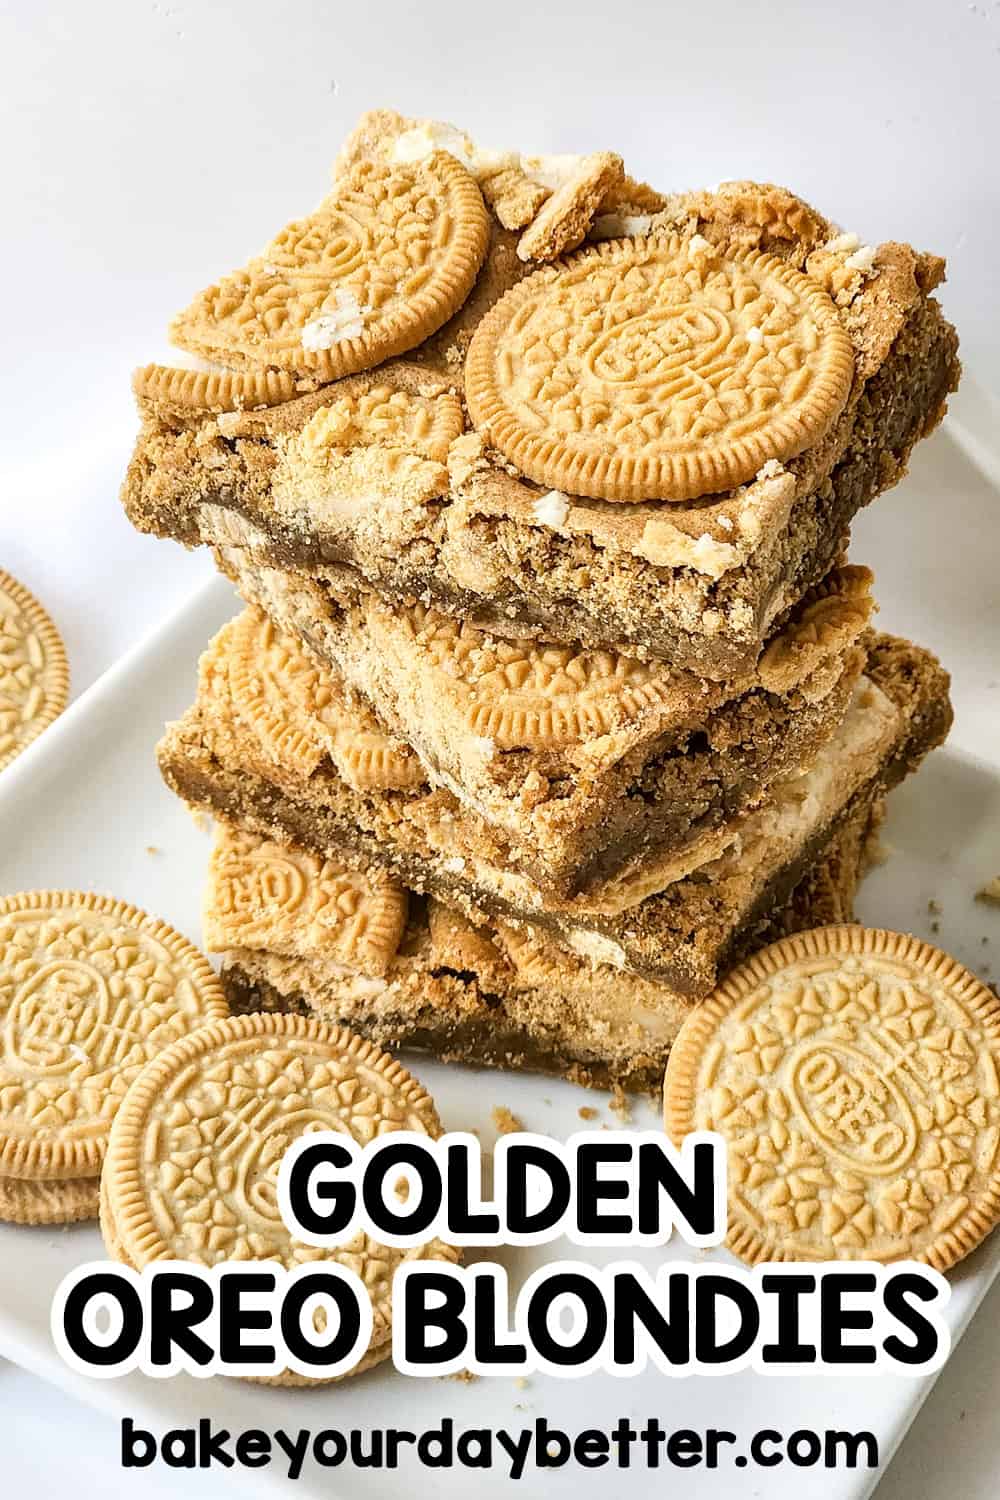 golden oreo blondies with text overlay that says: golden oreo blondies 